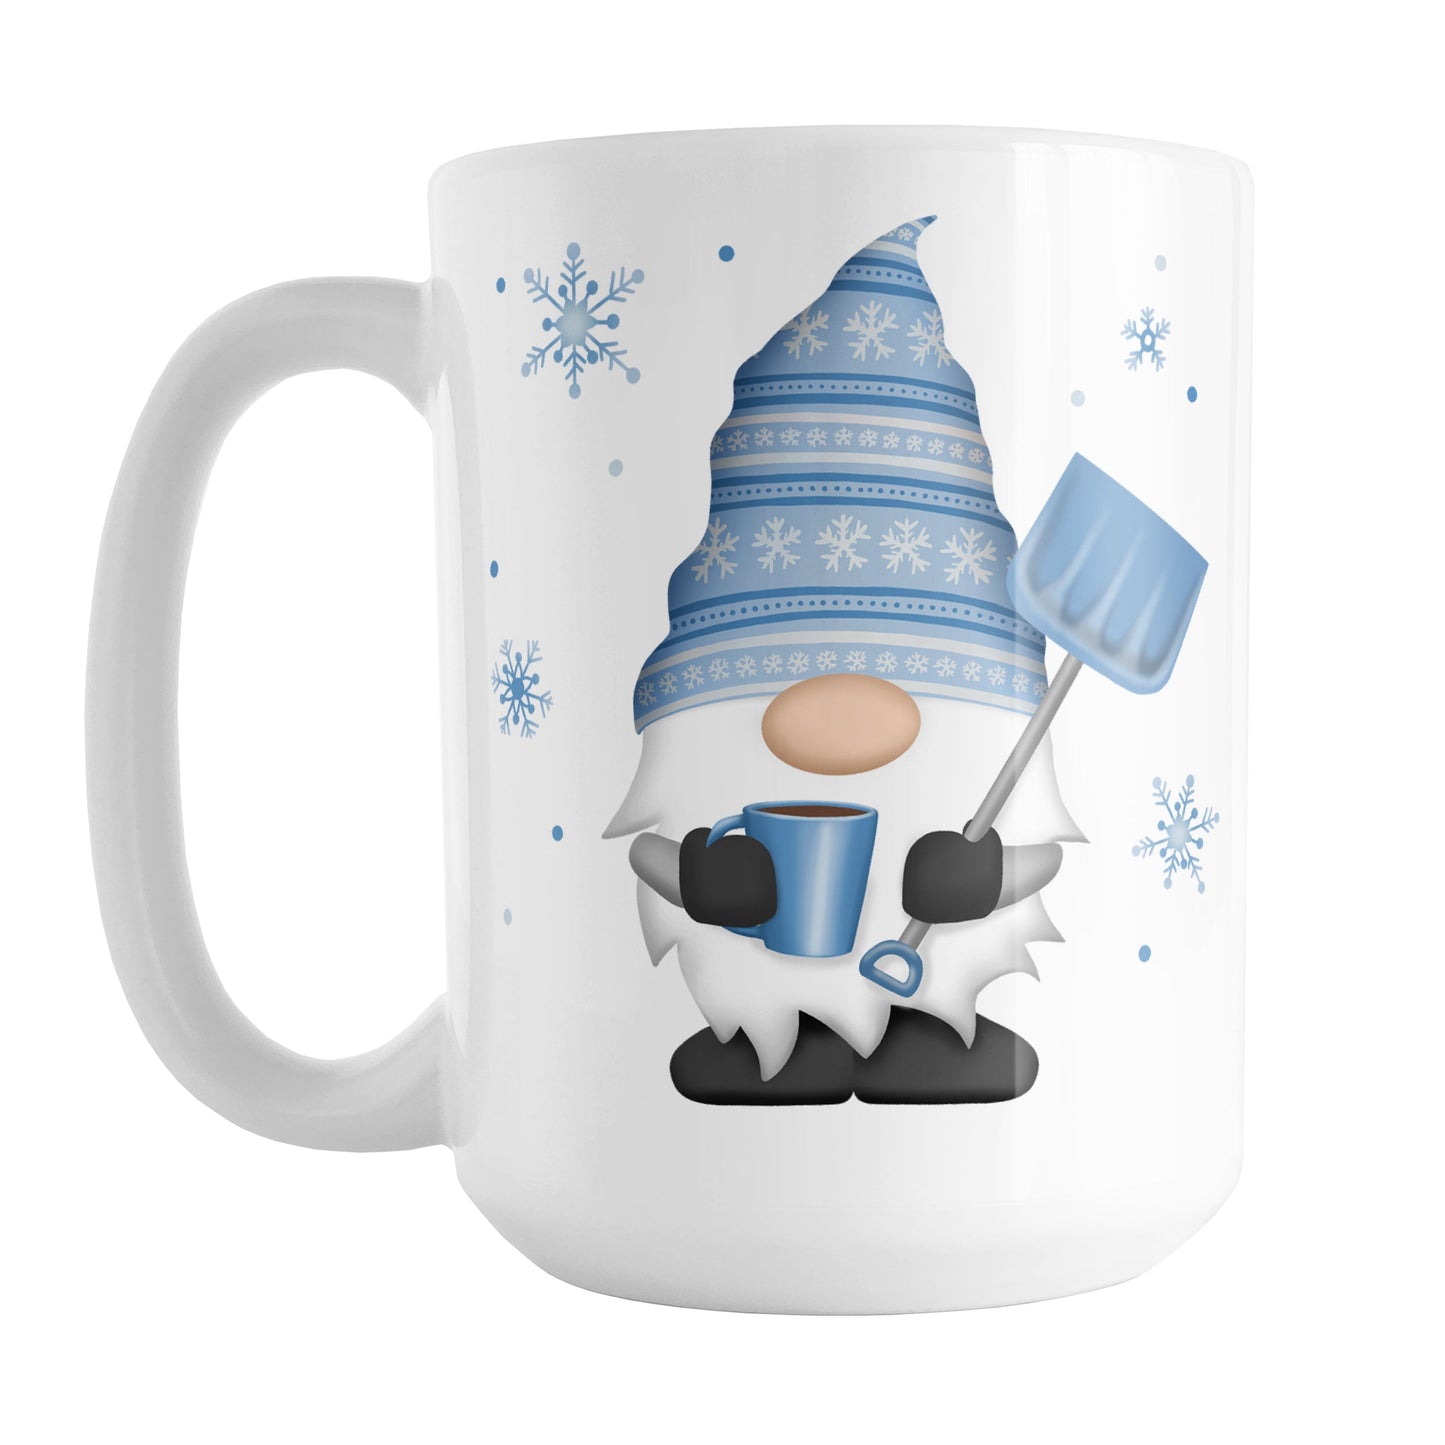 Winter Snowflake Gnome Mug (15oz) at Amy's Coffee Mugs. A ceramic coffee mug designed with a gnome with a festive blue snowflake hat and holding a hot beverage and snow shovel with snowflakes around it. This cute winter gnome illustration is on both sides of the mug. 